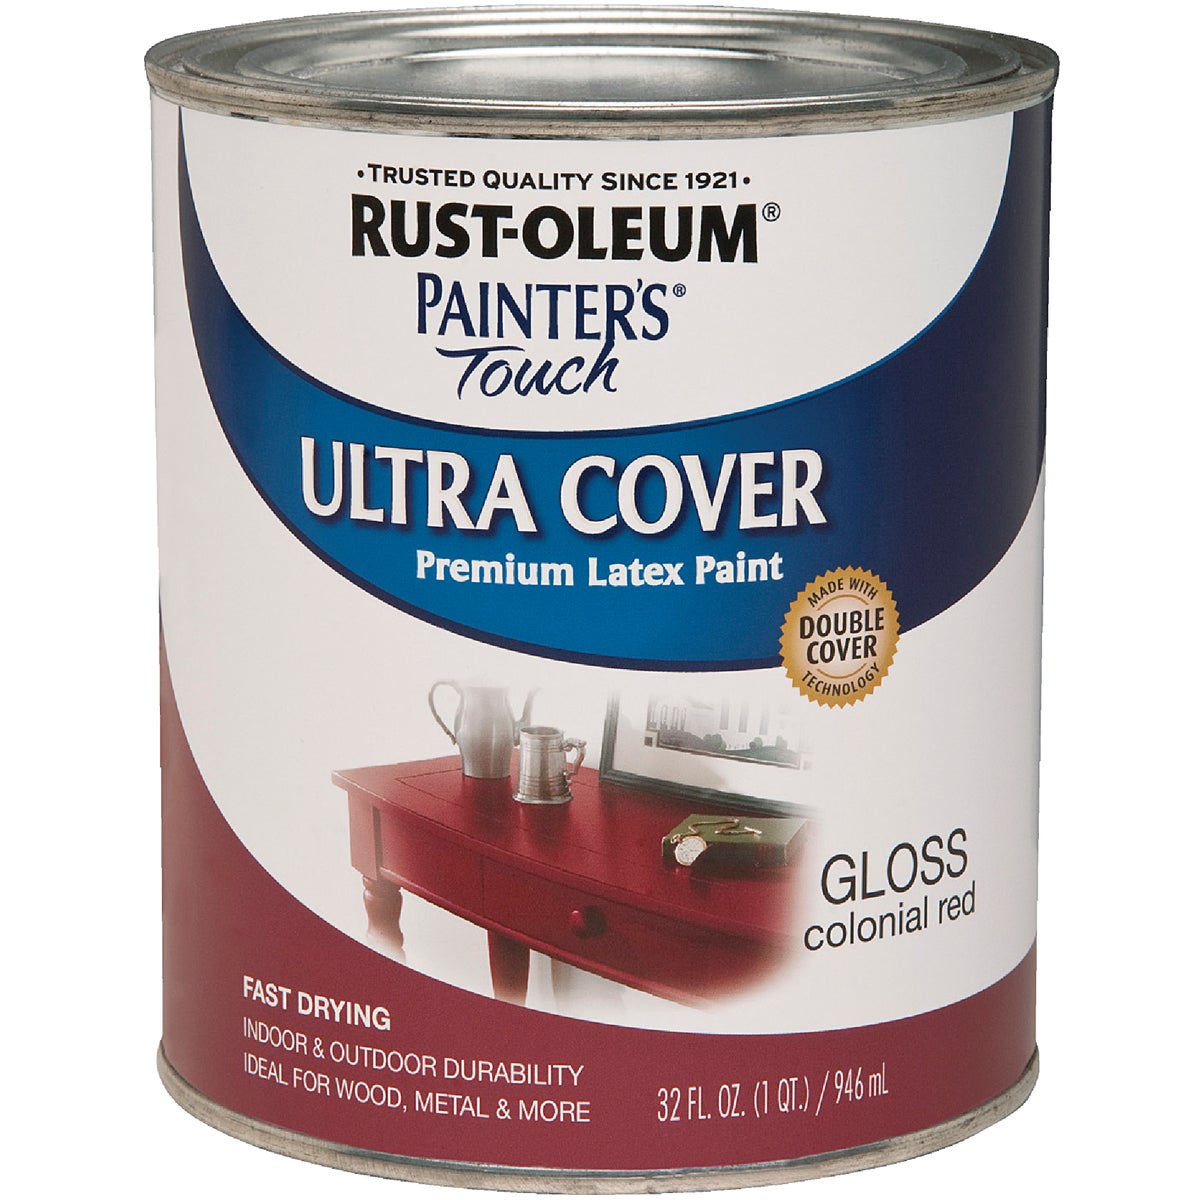 Rust-Oleum Painter's Touch 2X Ultra Cover Premium Latex Paint, Colonial Red, 1 Qt.